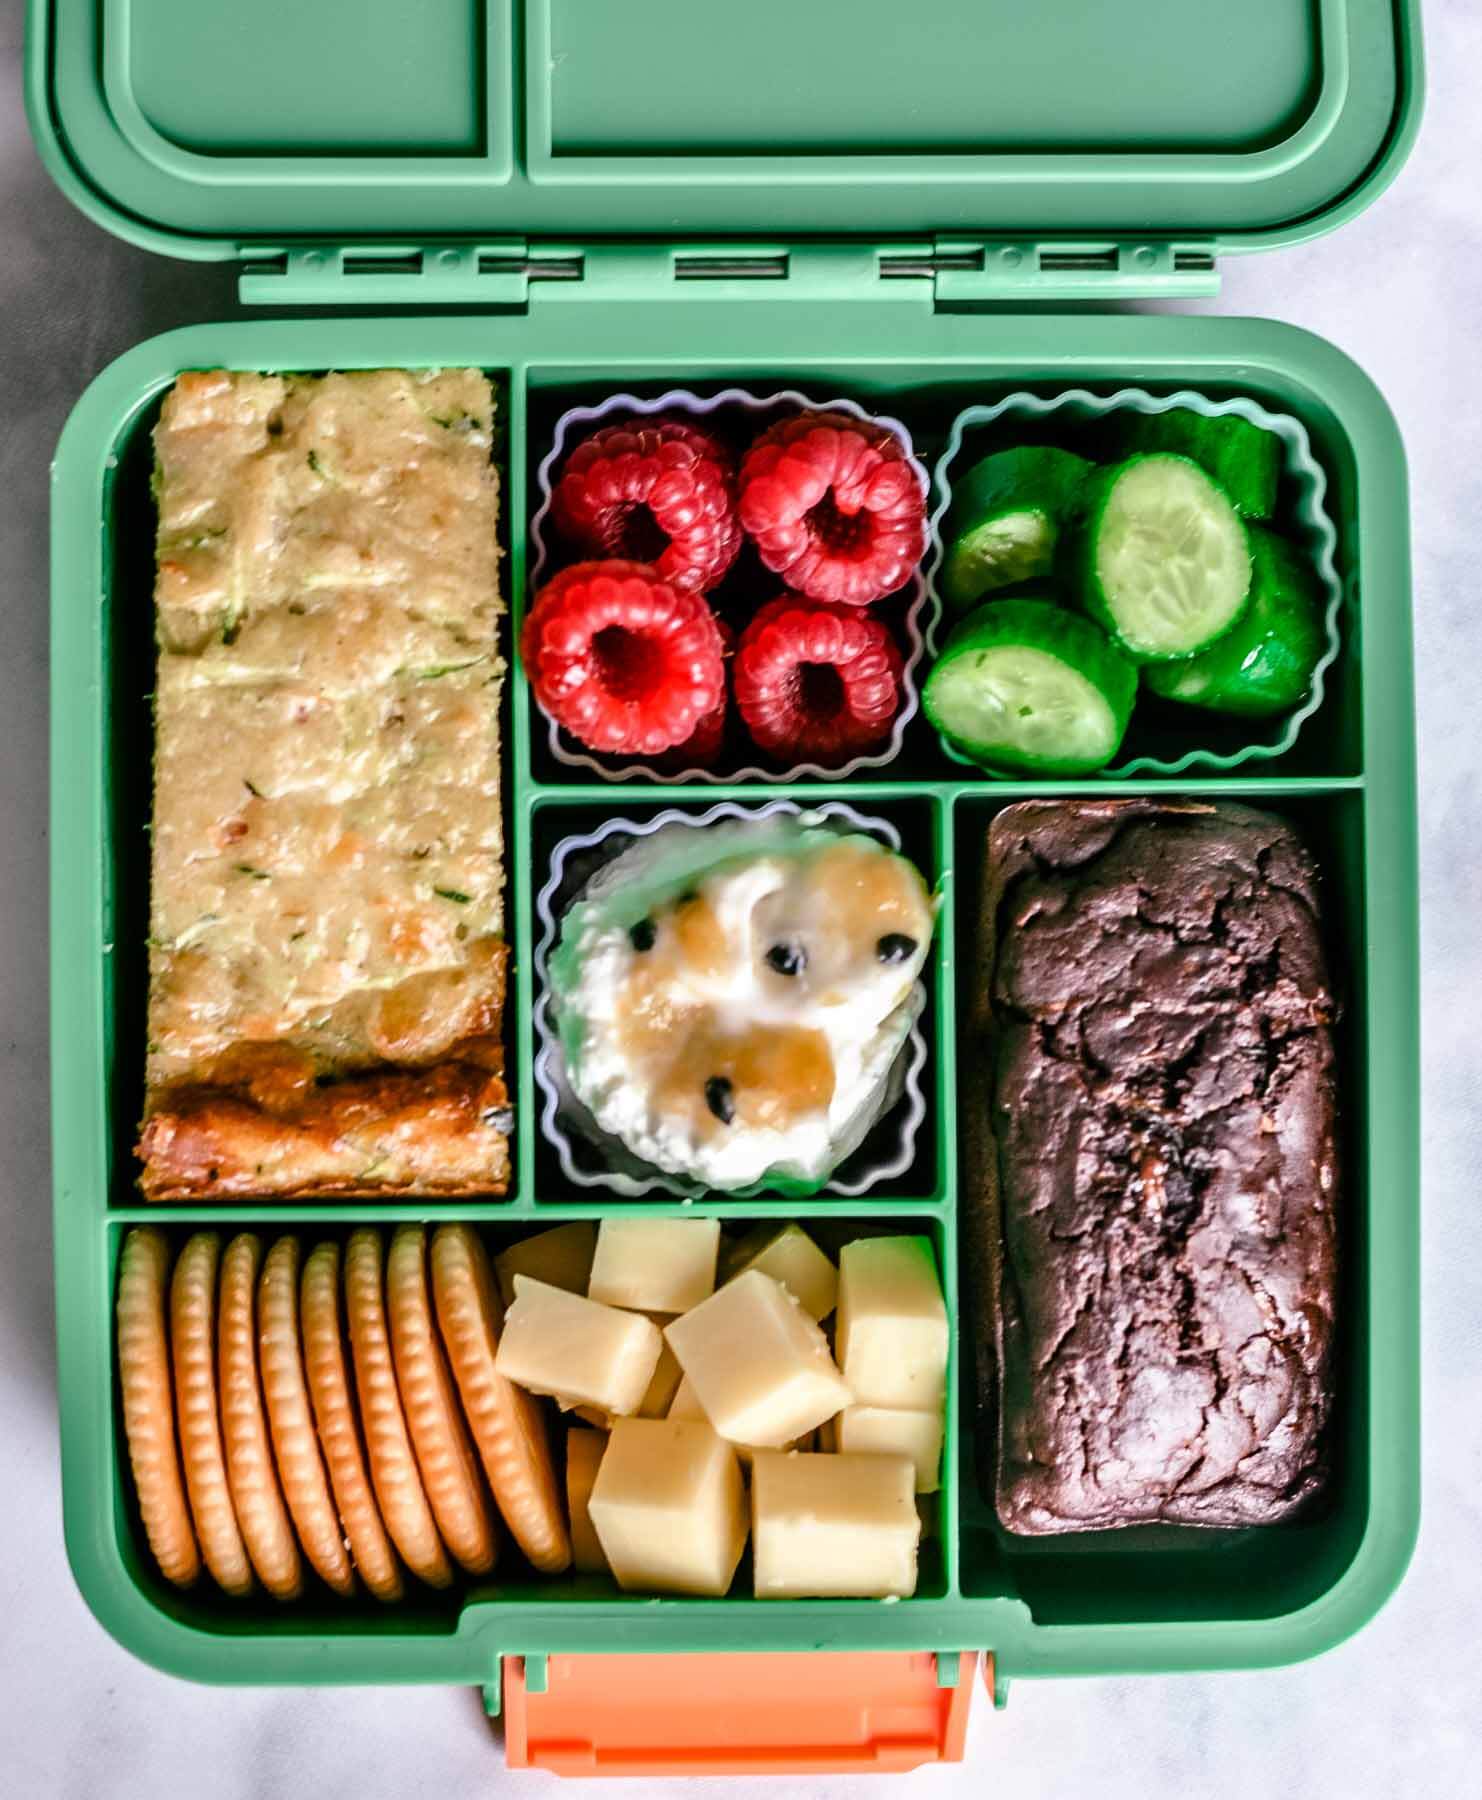 top view of a green bento lunchbox containing healthy foods